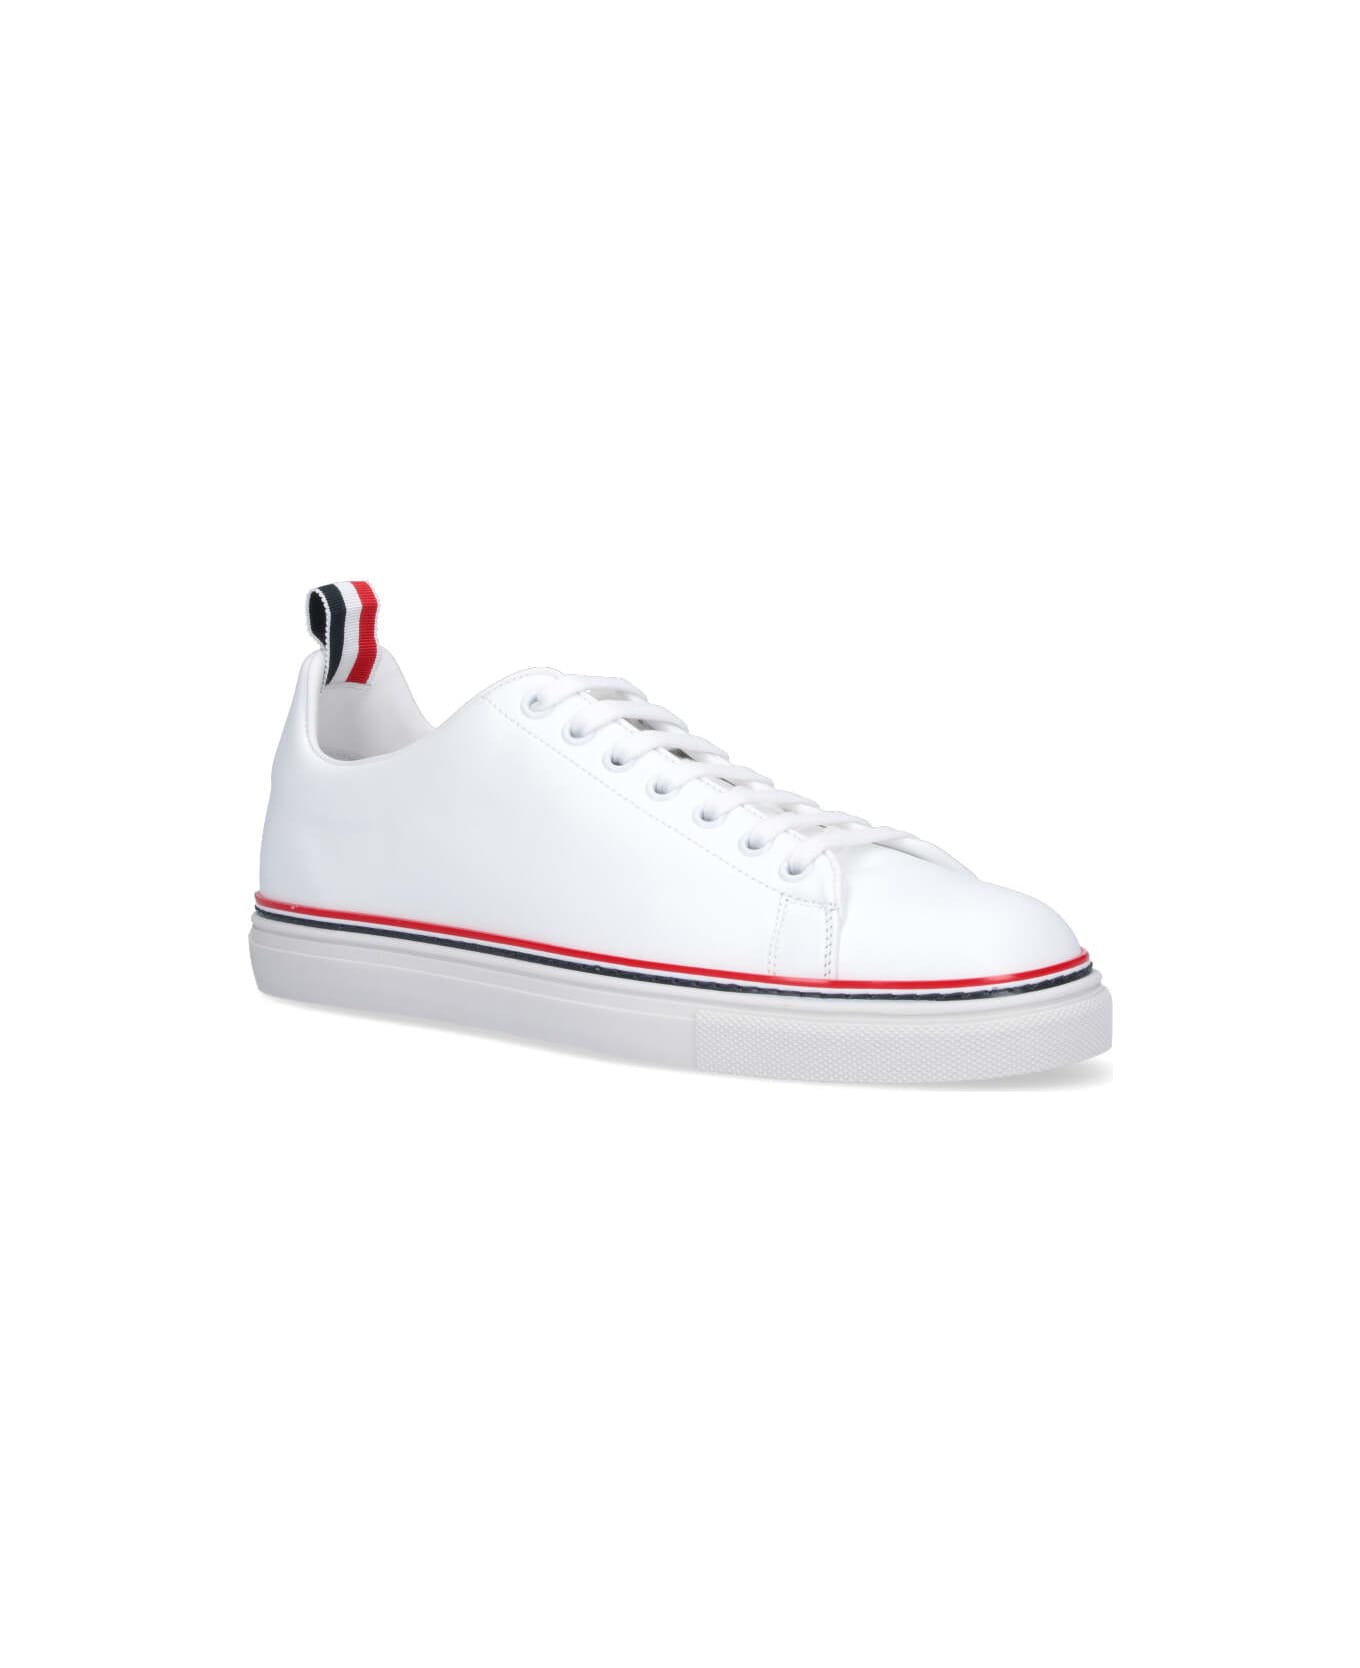 Thom Browne Calf Leather Tennis Shoes - White